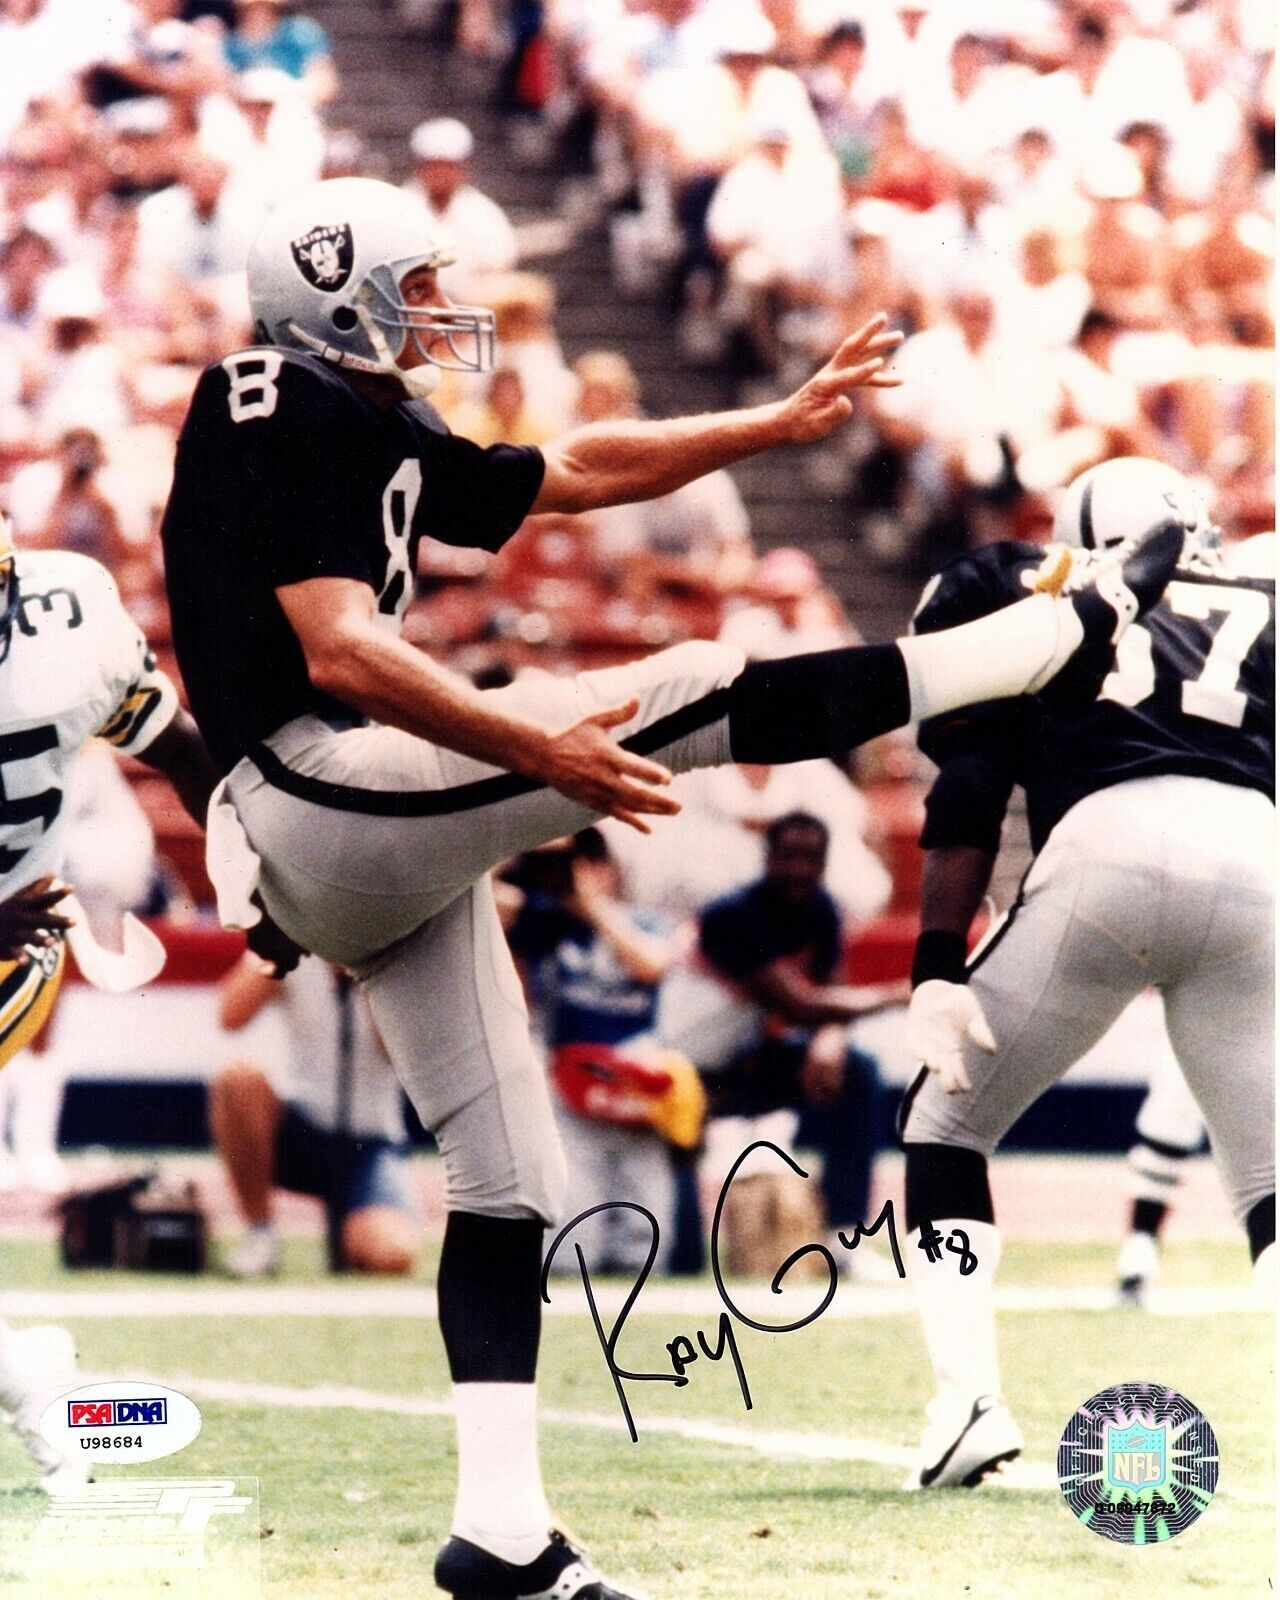 RAY GUY Signed Autographed 8X10 Photo Poster painting OAKLAND RAIDERS